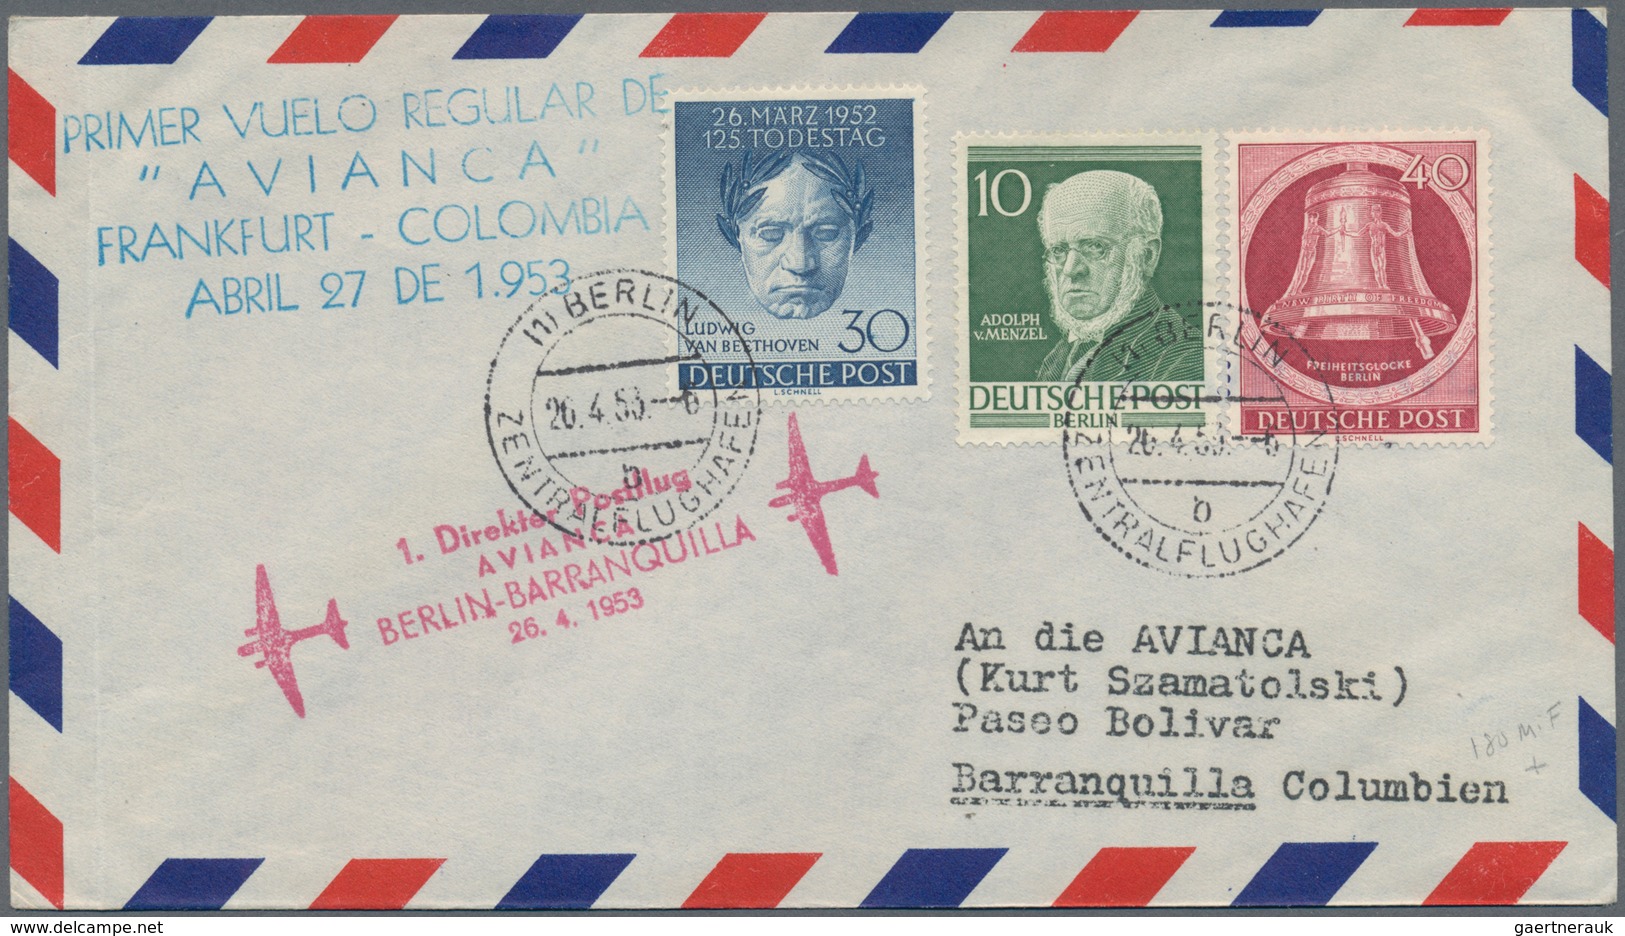 Flugpost Alle Welt: 1925-60, "AIR MAILS & FIRST FLIGHTS" 66 covers & cards most Europe & Overseas, h